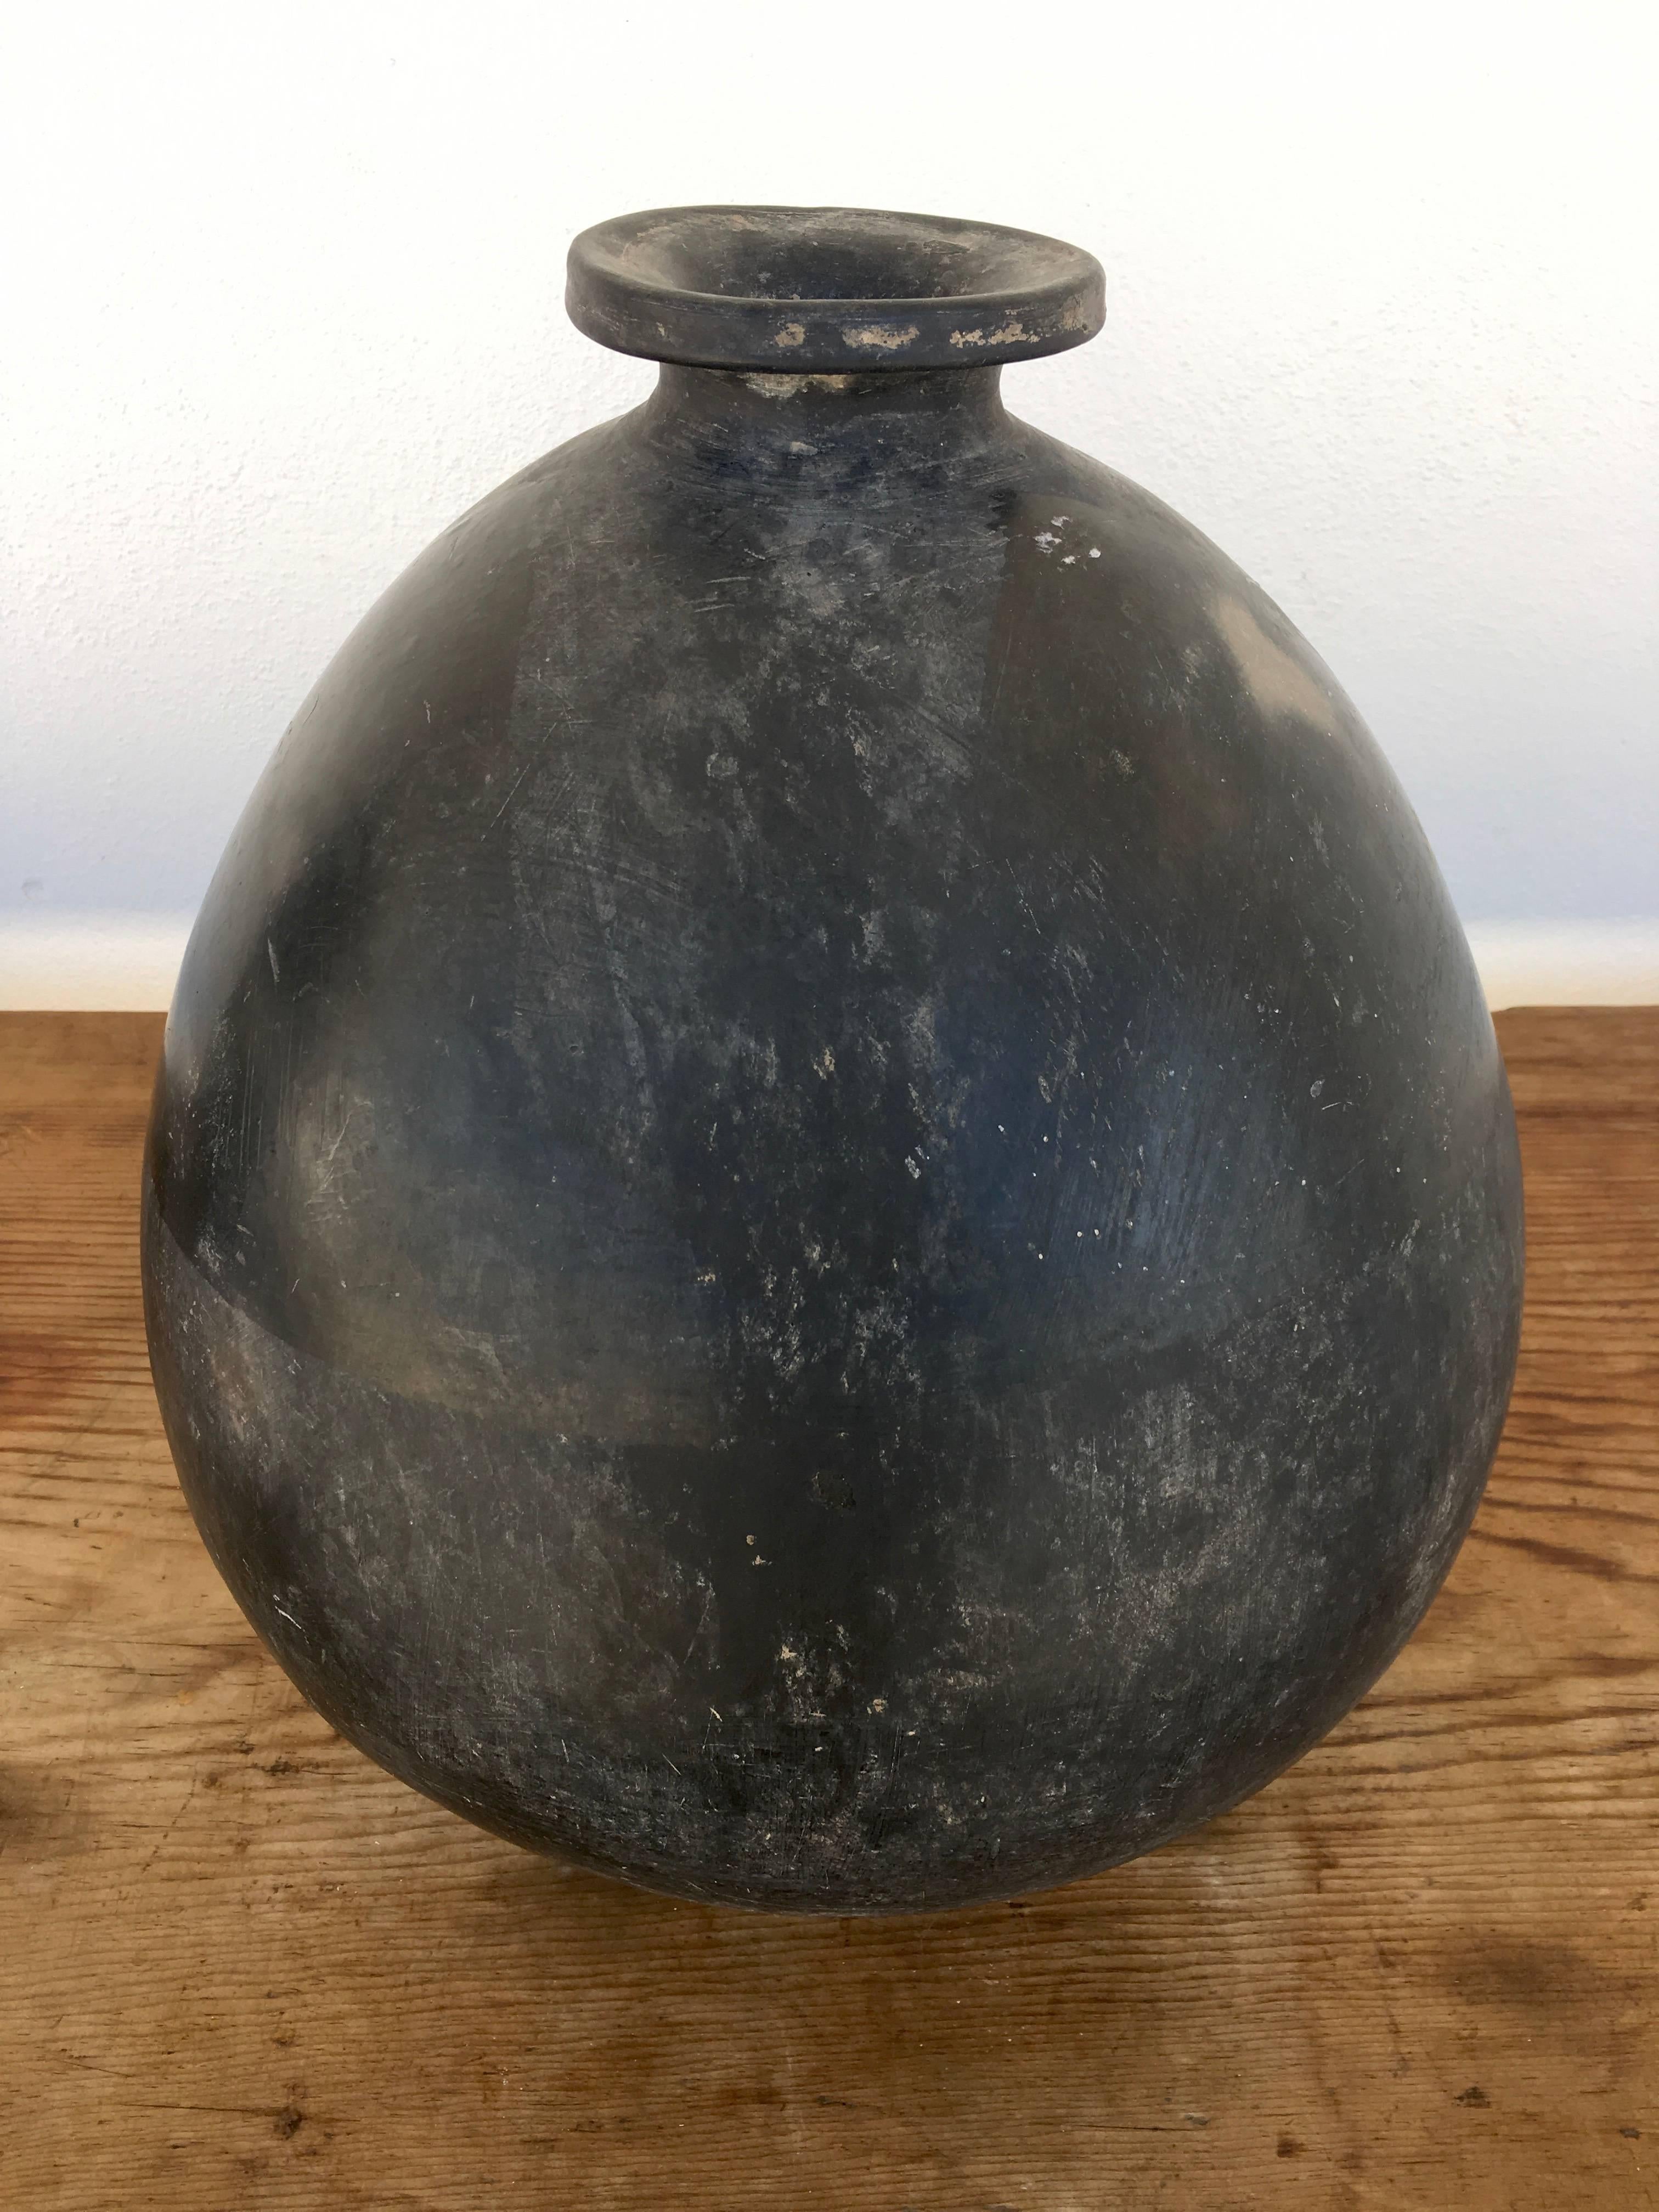 Mexican Ceramic Jug Used for Housing Mezcal from Oaxaca, Mexico